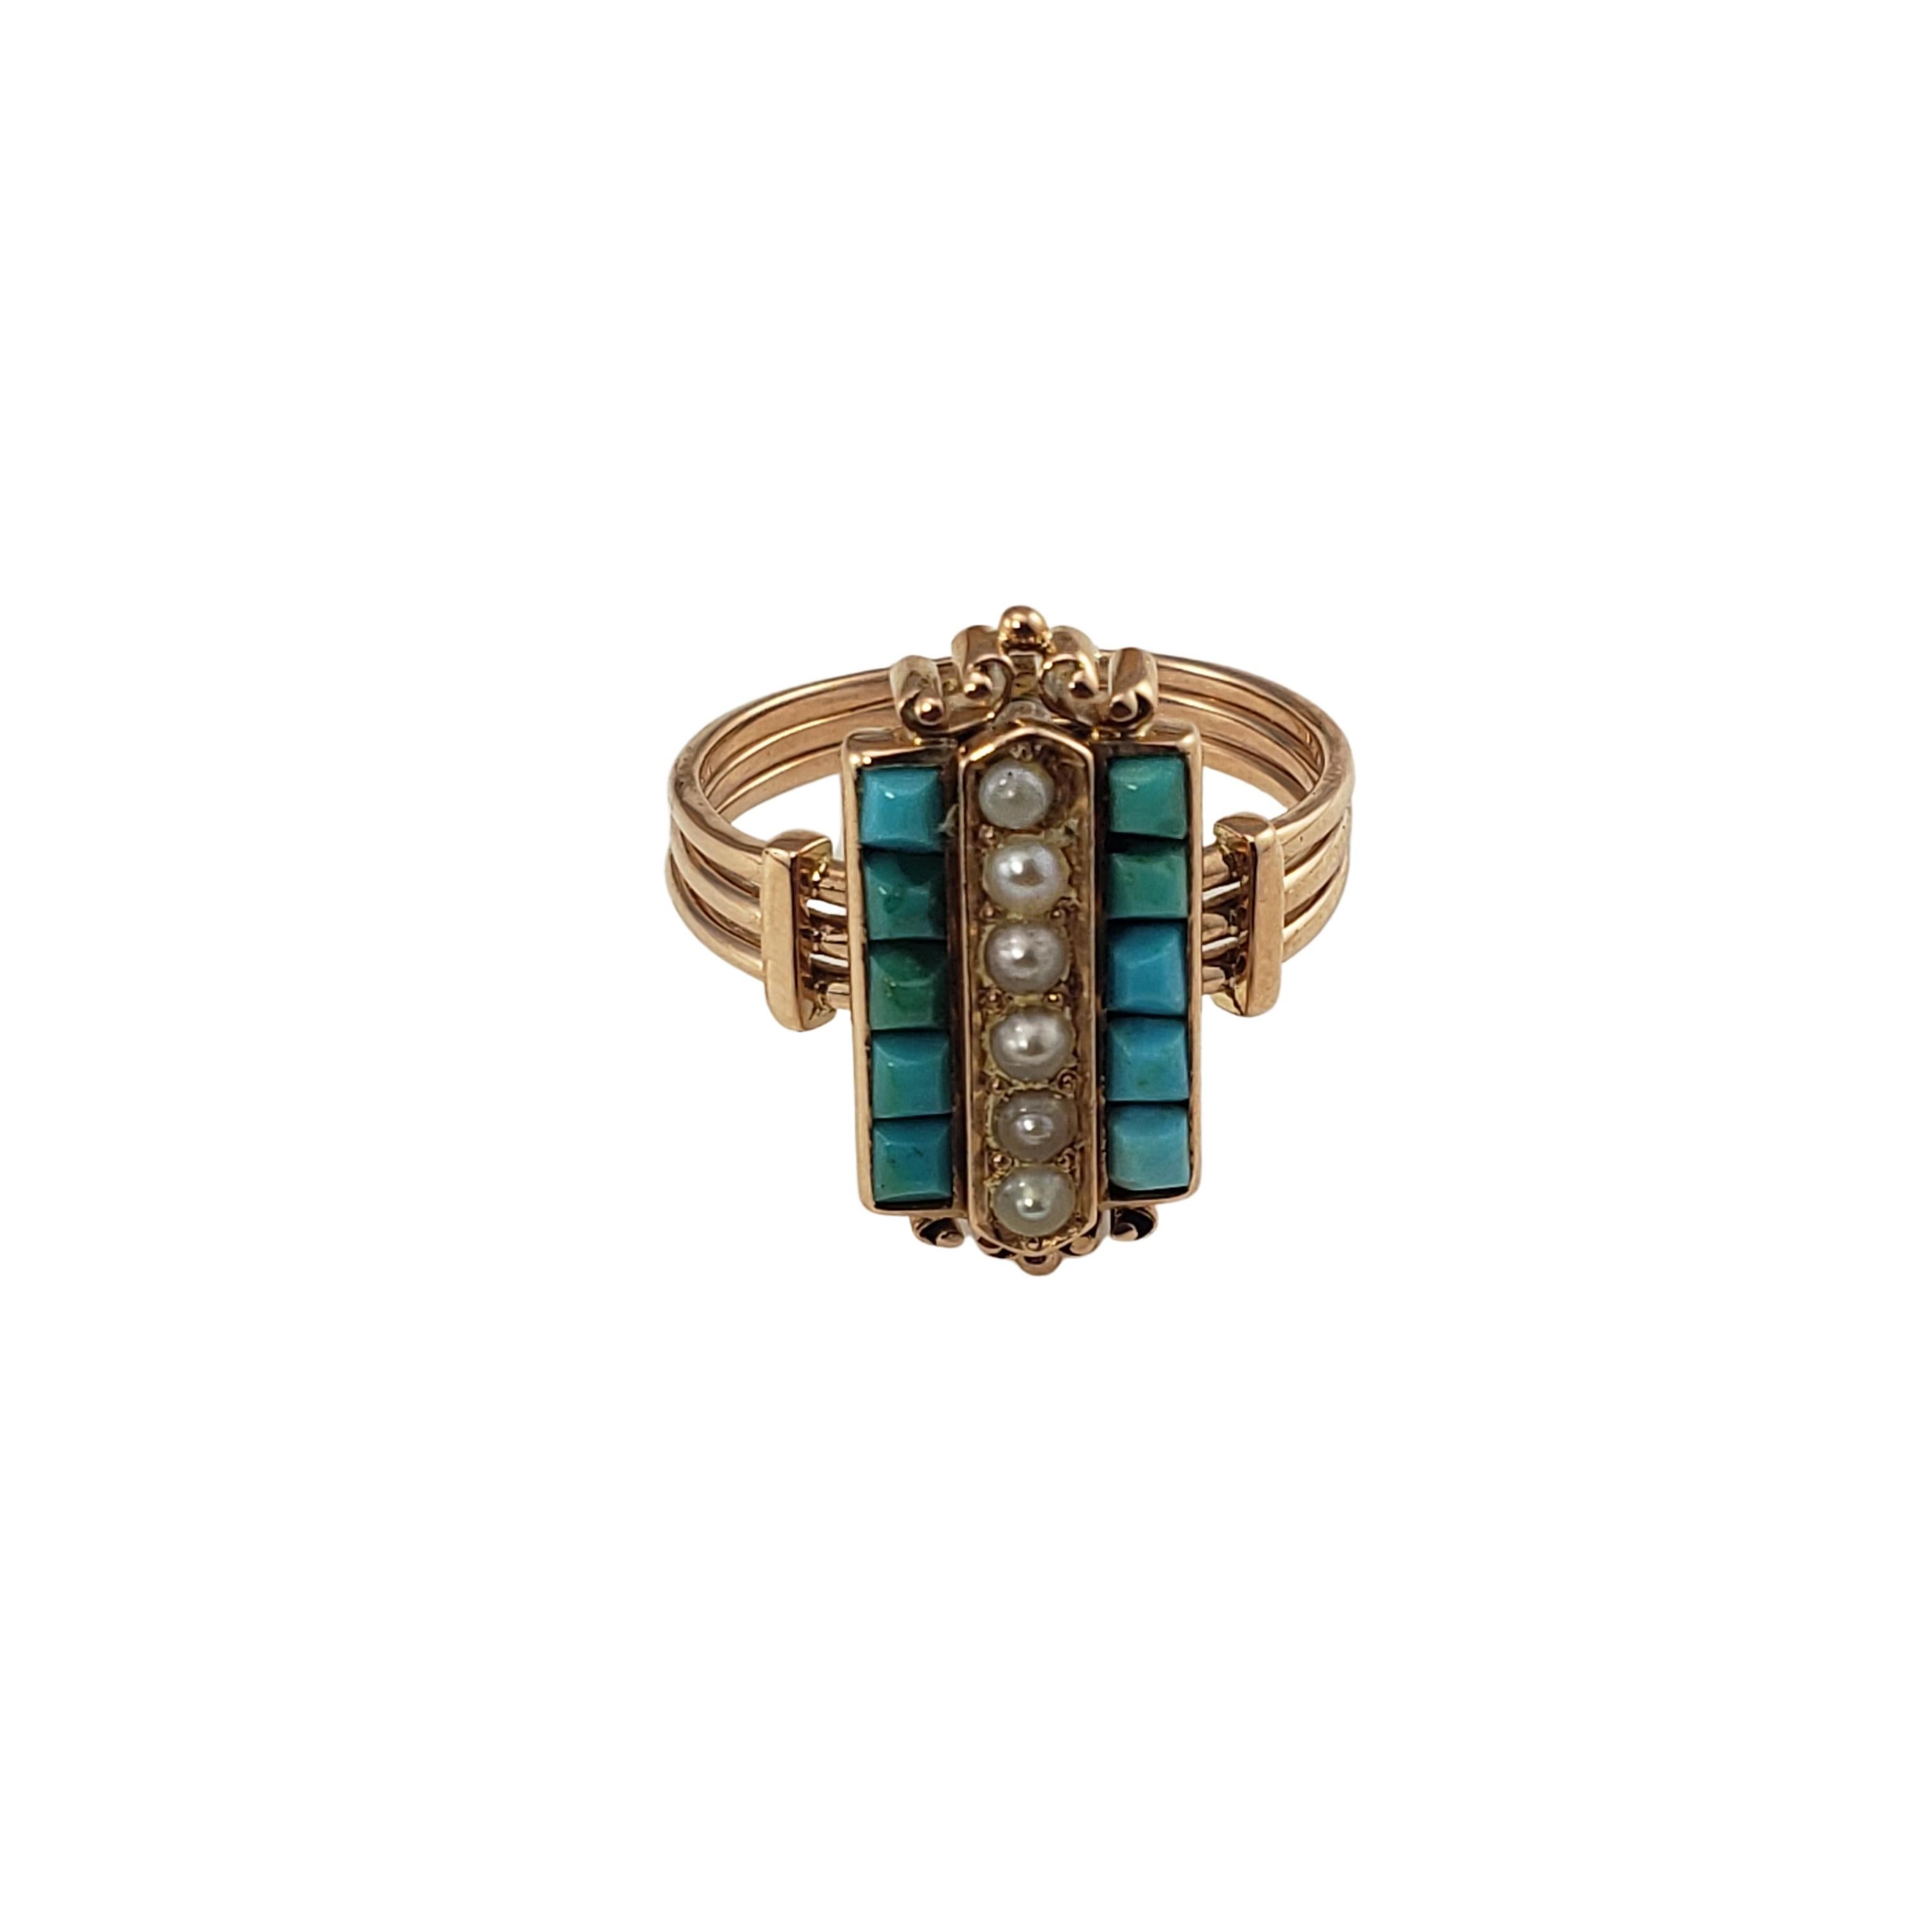 10 Karat Rose Gold Turquoise and Pearl Ring Size 5.25-

This elegant ring features ten turquoise stones and six seed pearls set in beautifully detailed 10K rose gold.  Top of ring measures
17 mm x 9 mm.  Shank:  2.5 mm.

Ring Size:  5.25

Weight: 